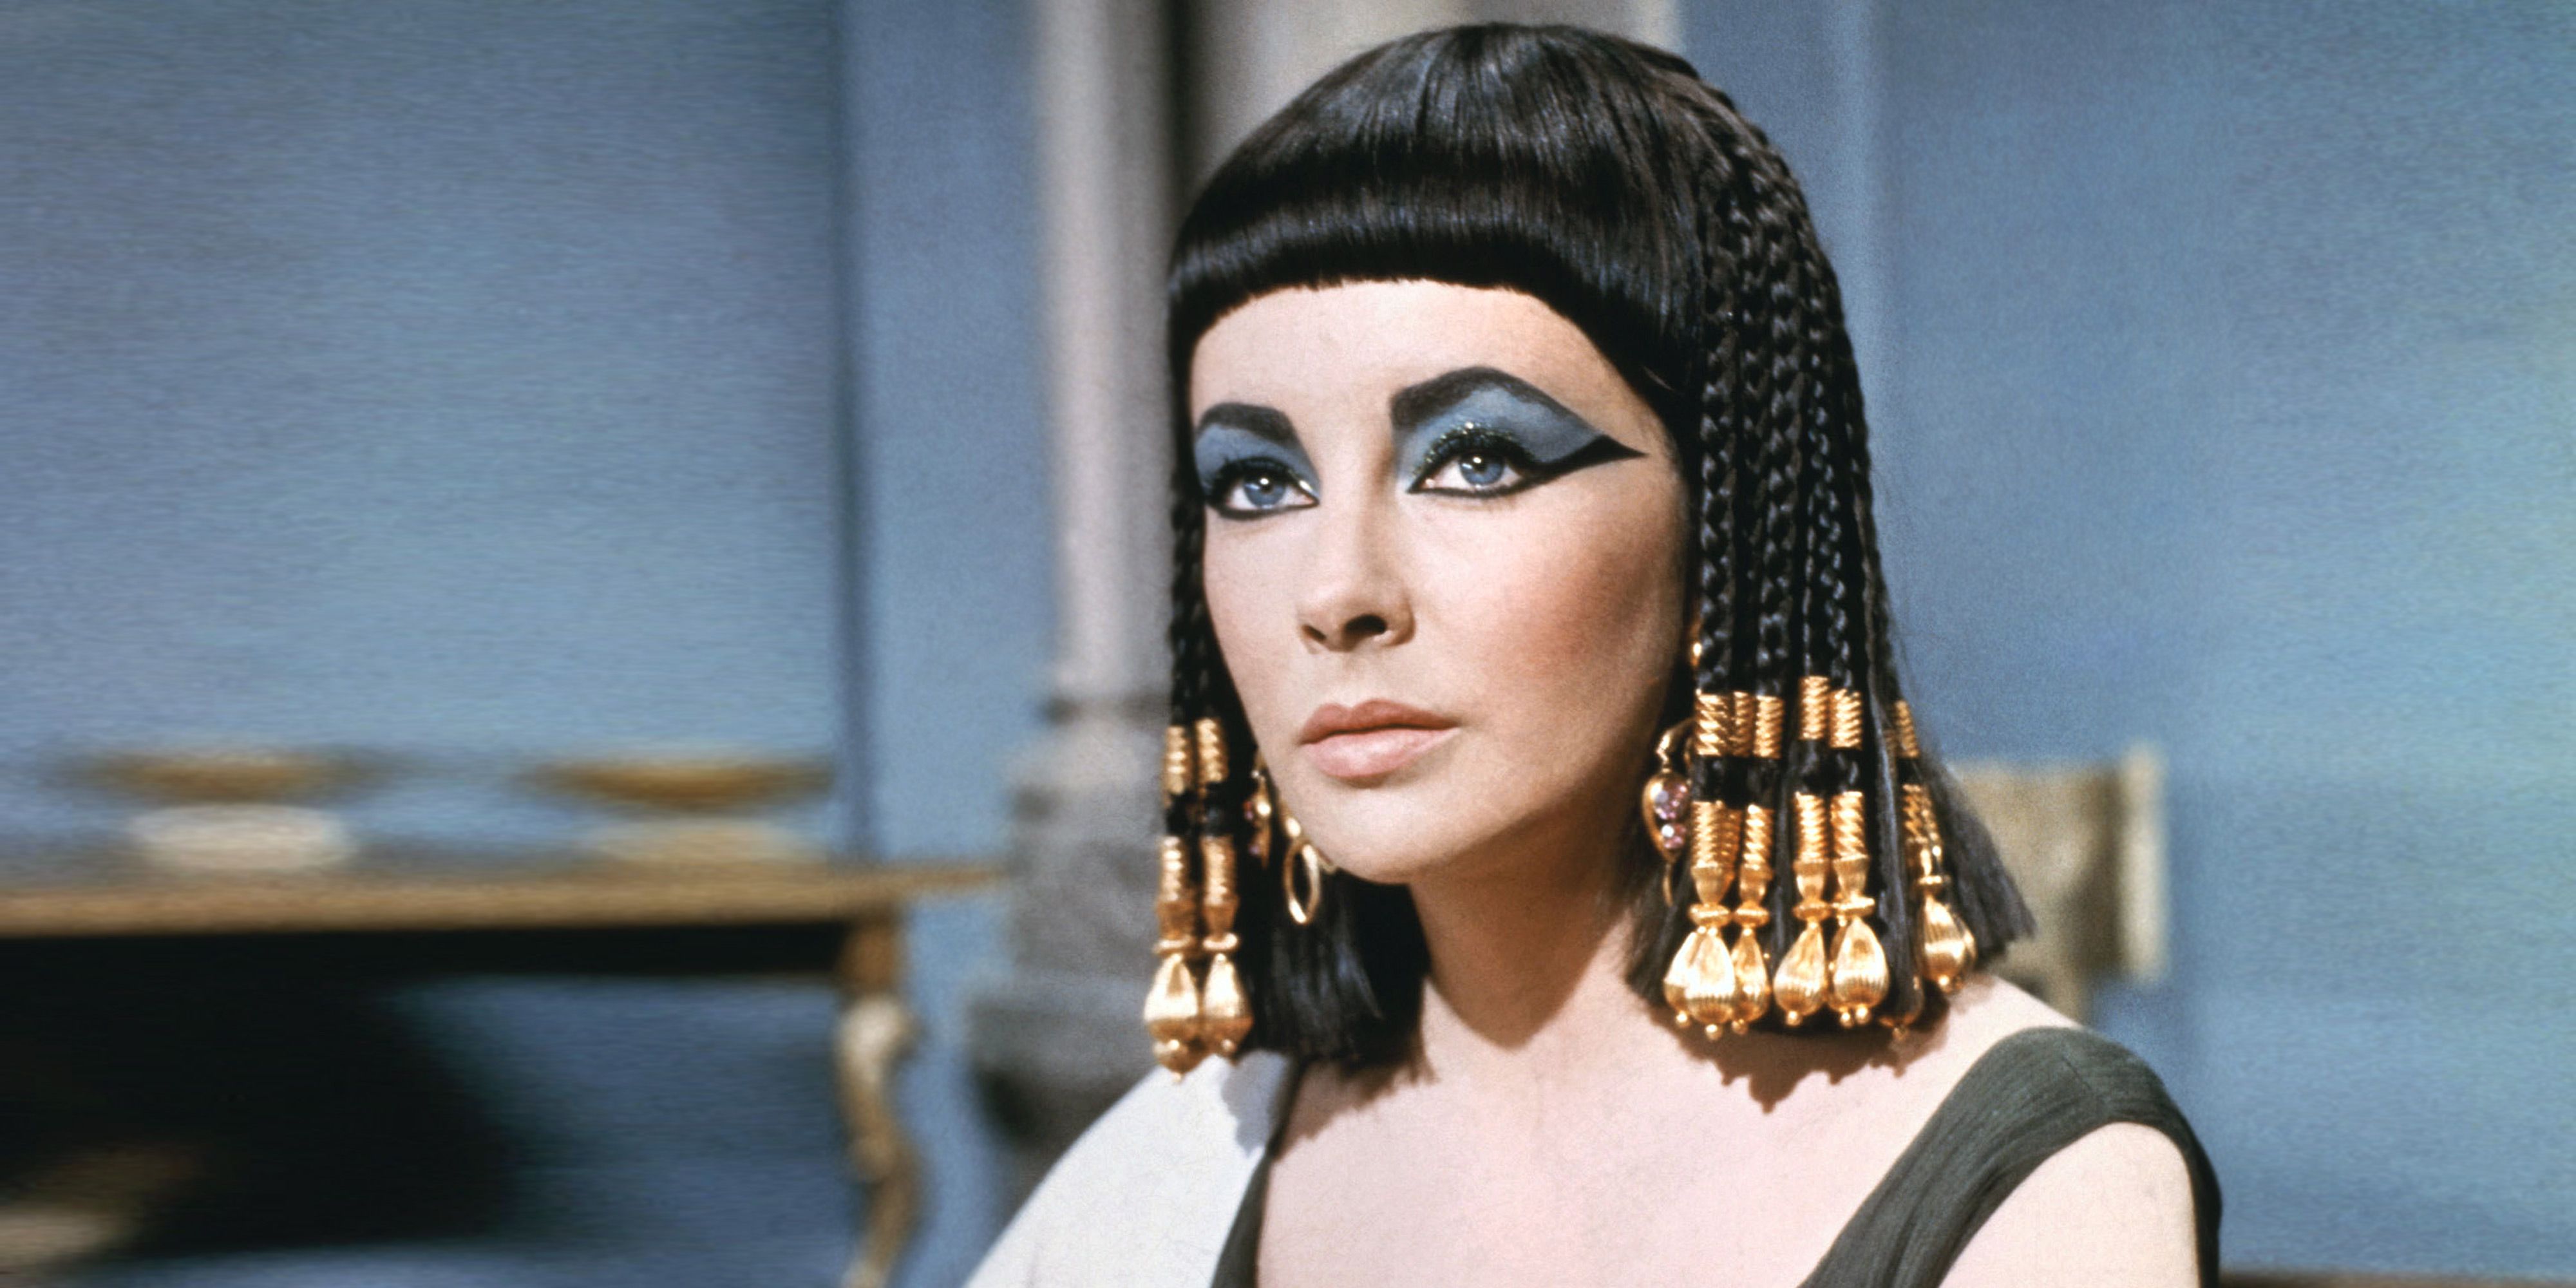 ancient egyptian beauty secrets you didn't know